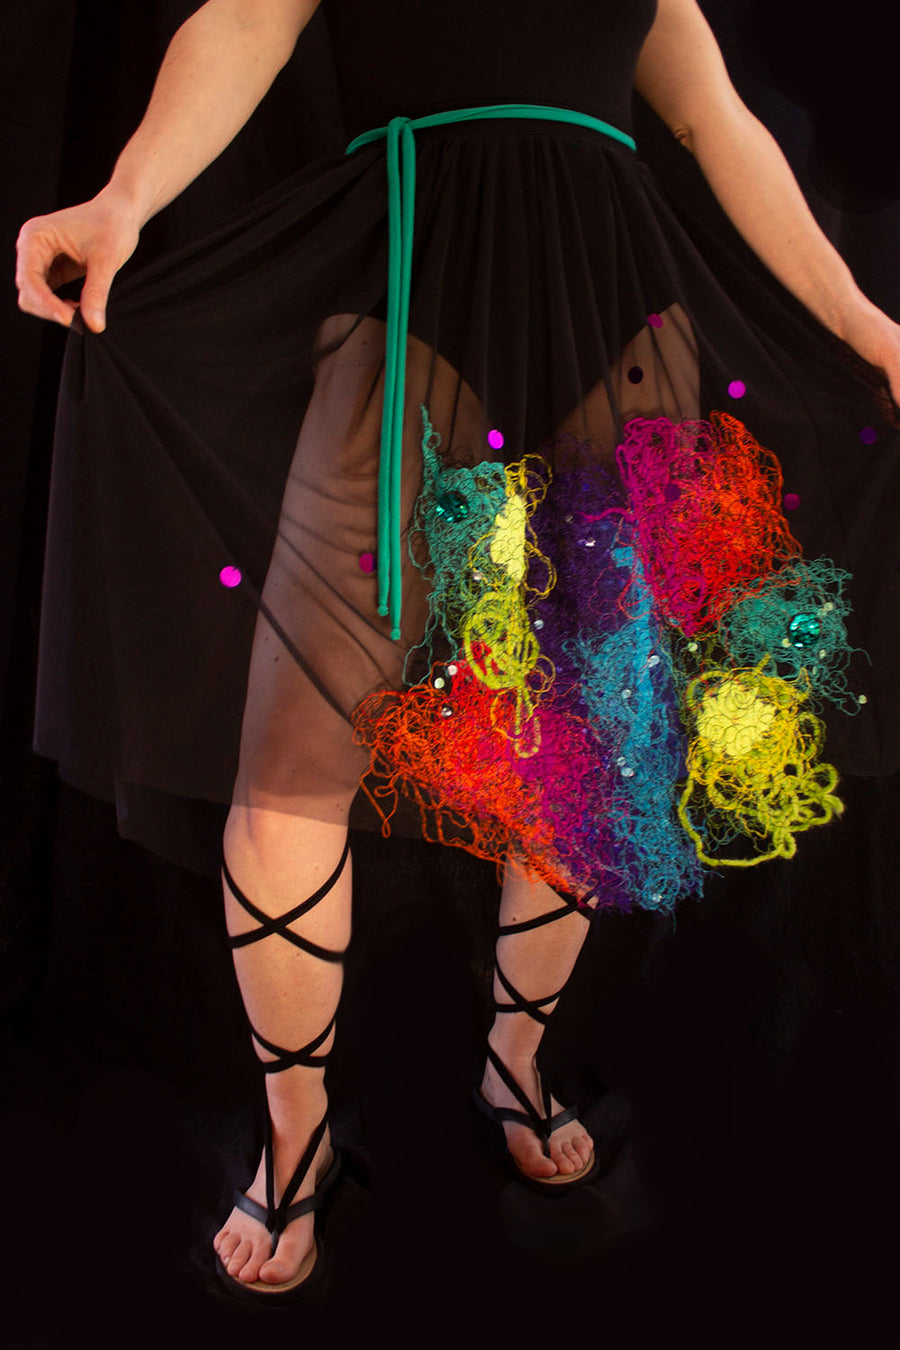 TRANSPARENT BLACK Petticoat WITH MULTICOLORED EMBROIDERY